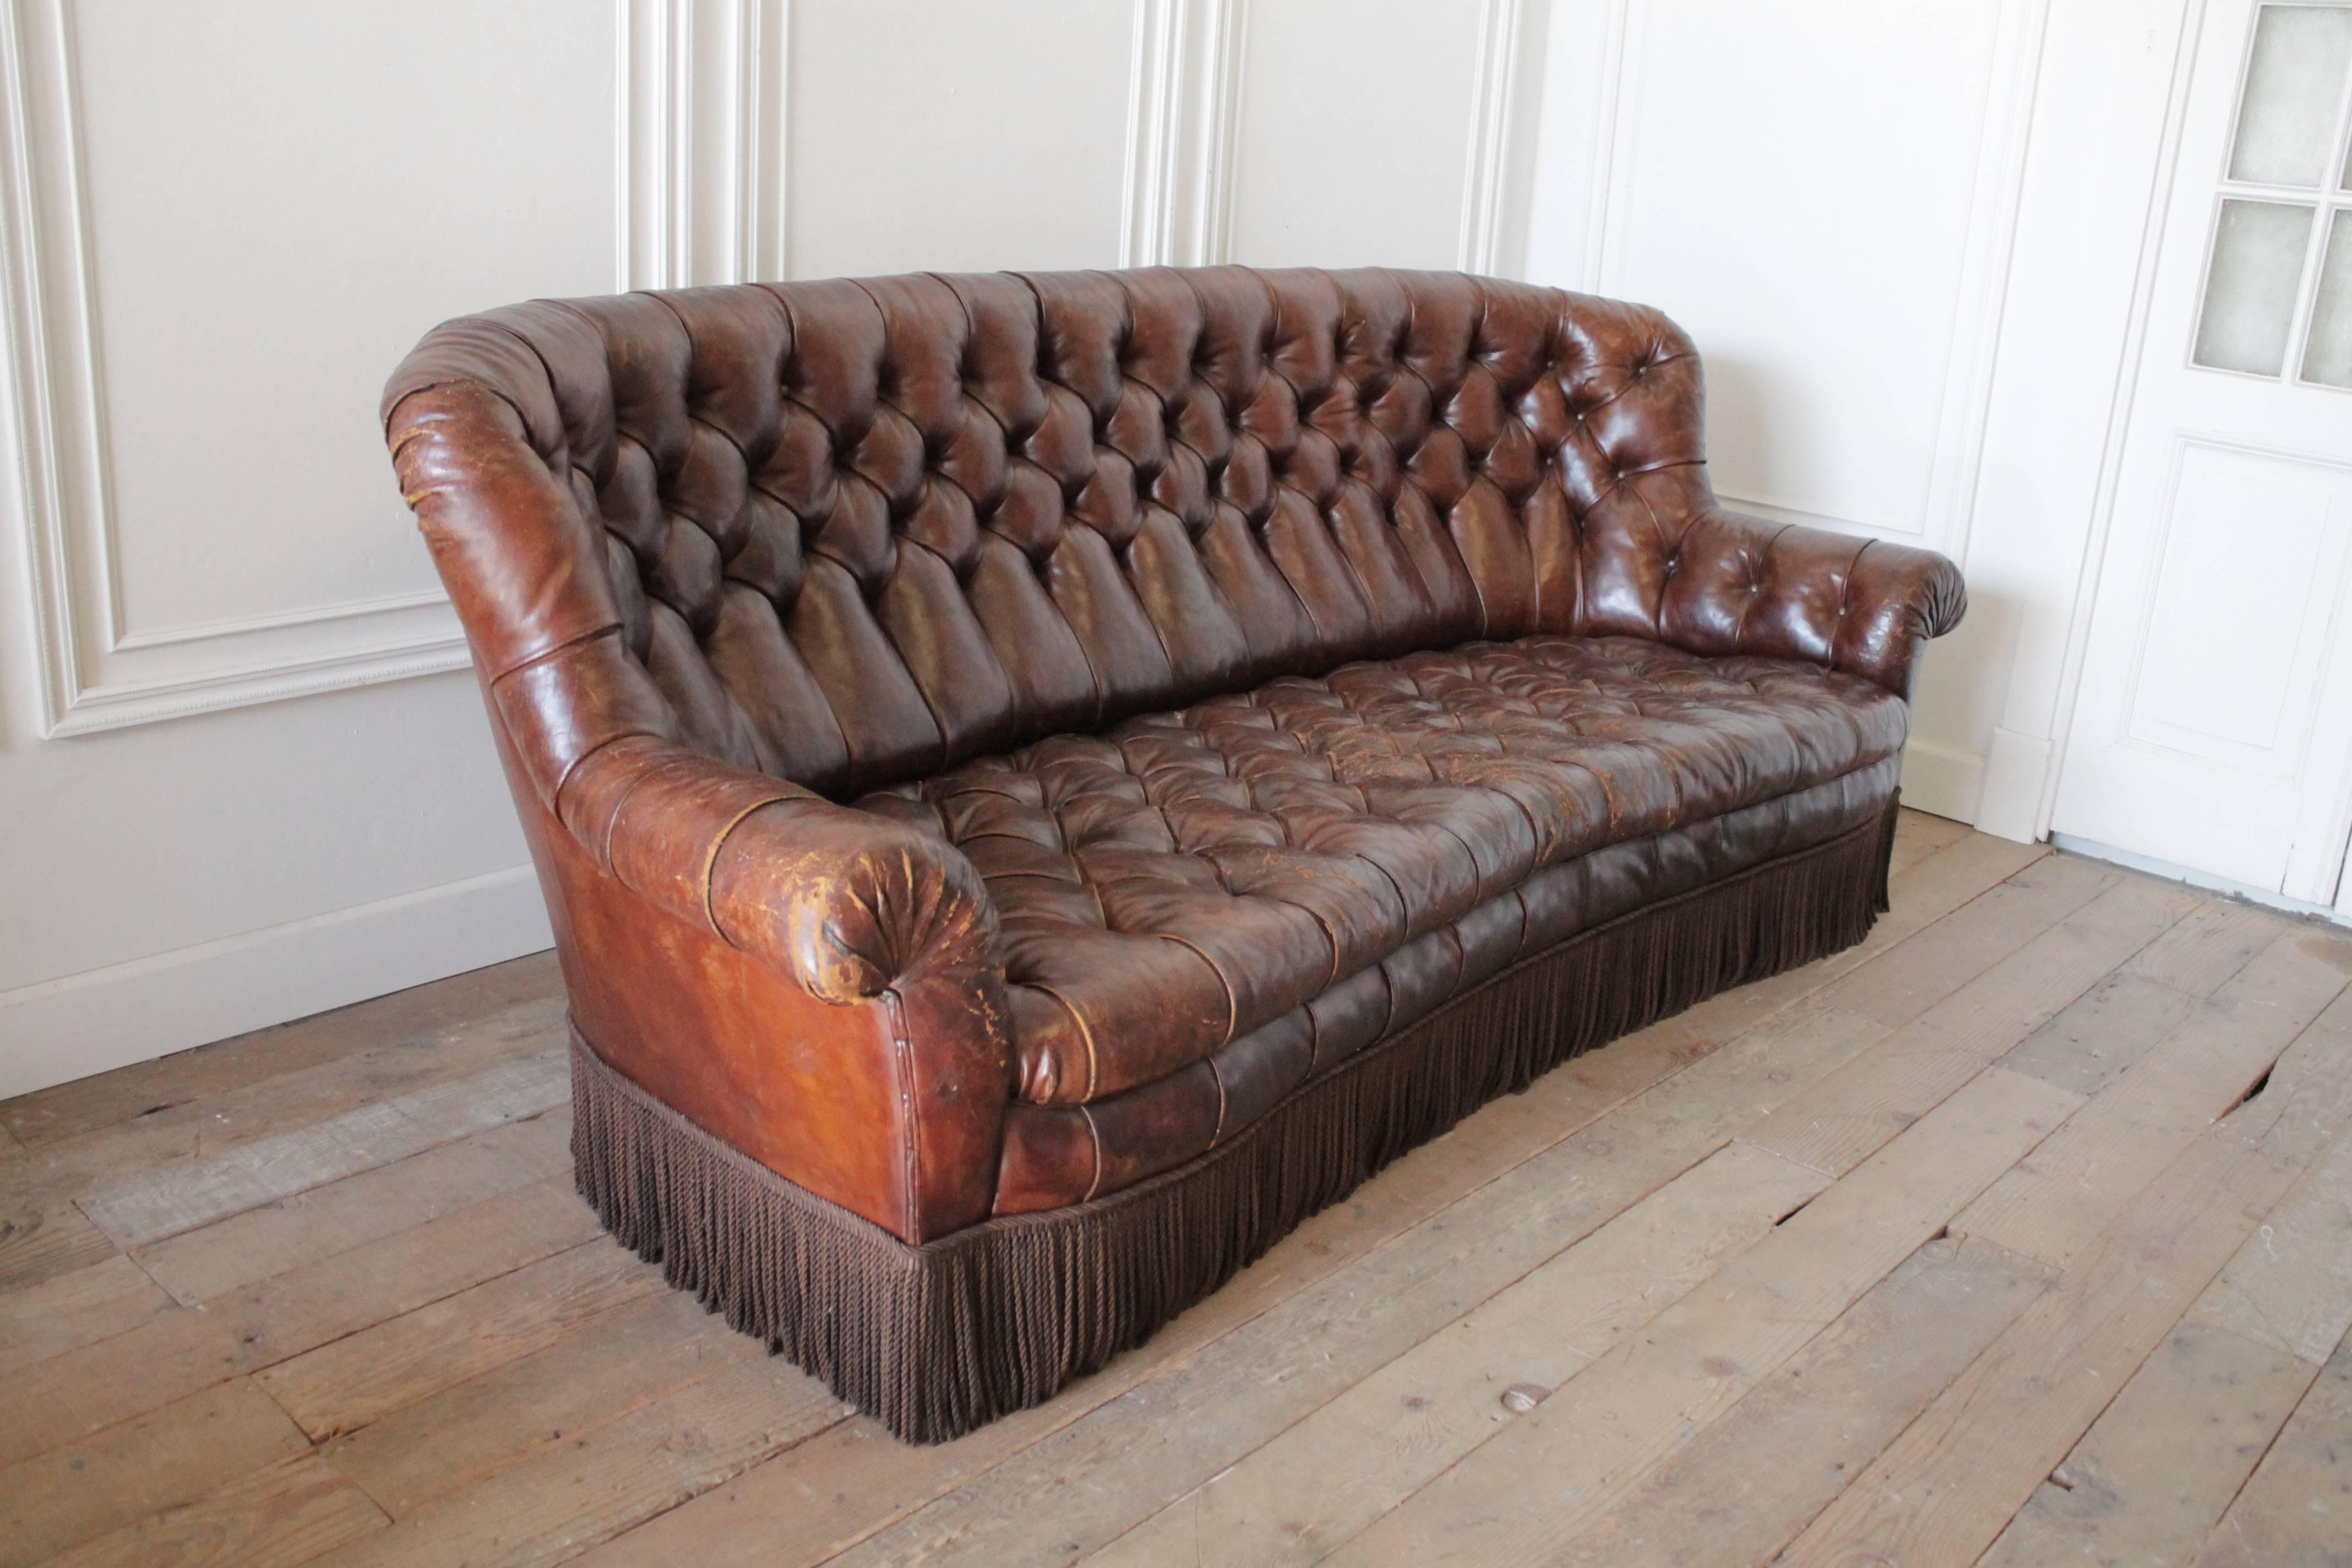 Classic rich brown leather Chesterfield with wonderful patina. This Chesterfield is very unique, the Classic rolled arms, and high back support your back and neck, hugging you, and the deep seat is another great feature making this very comfortable